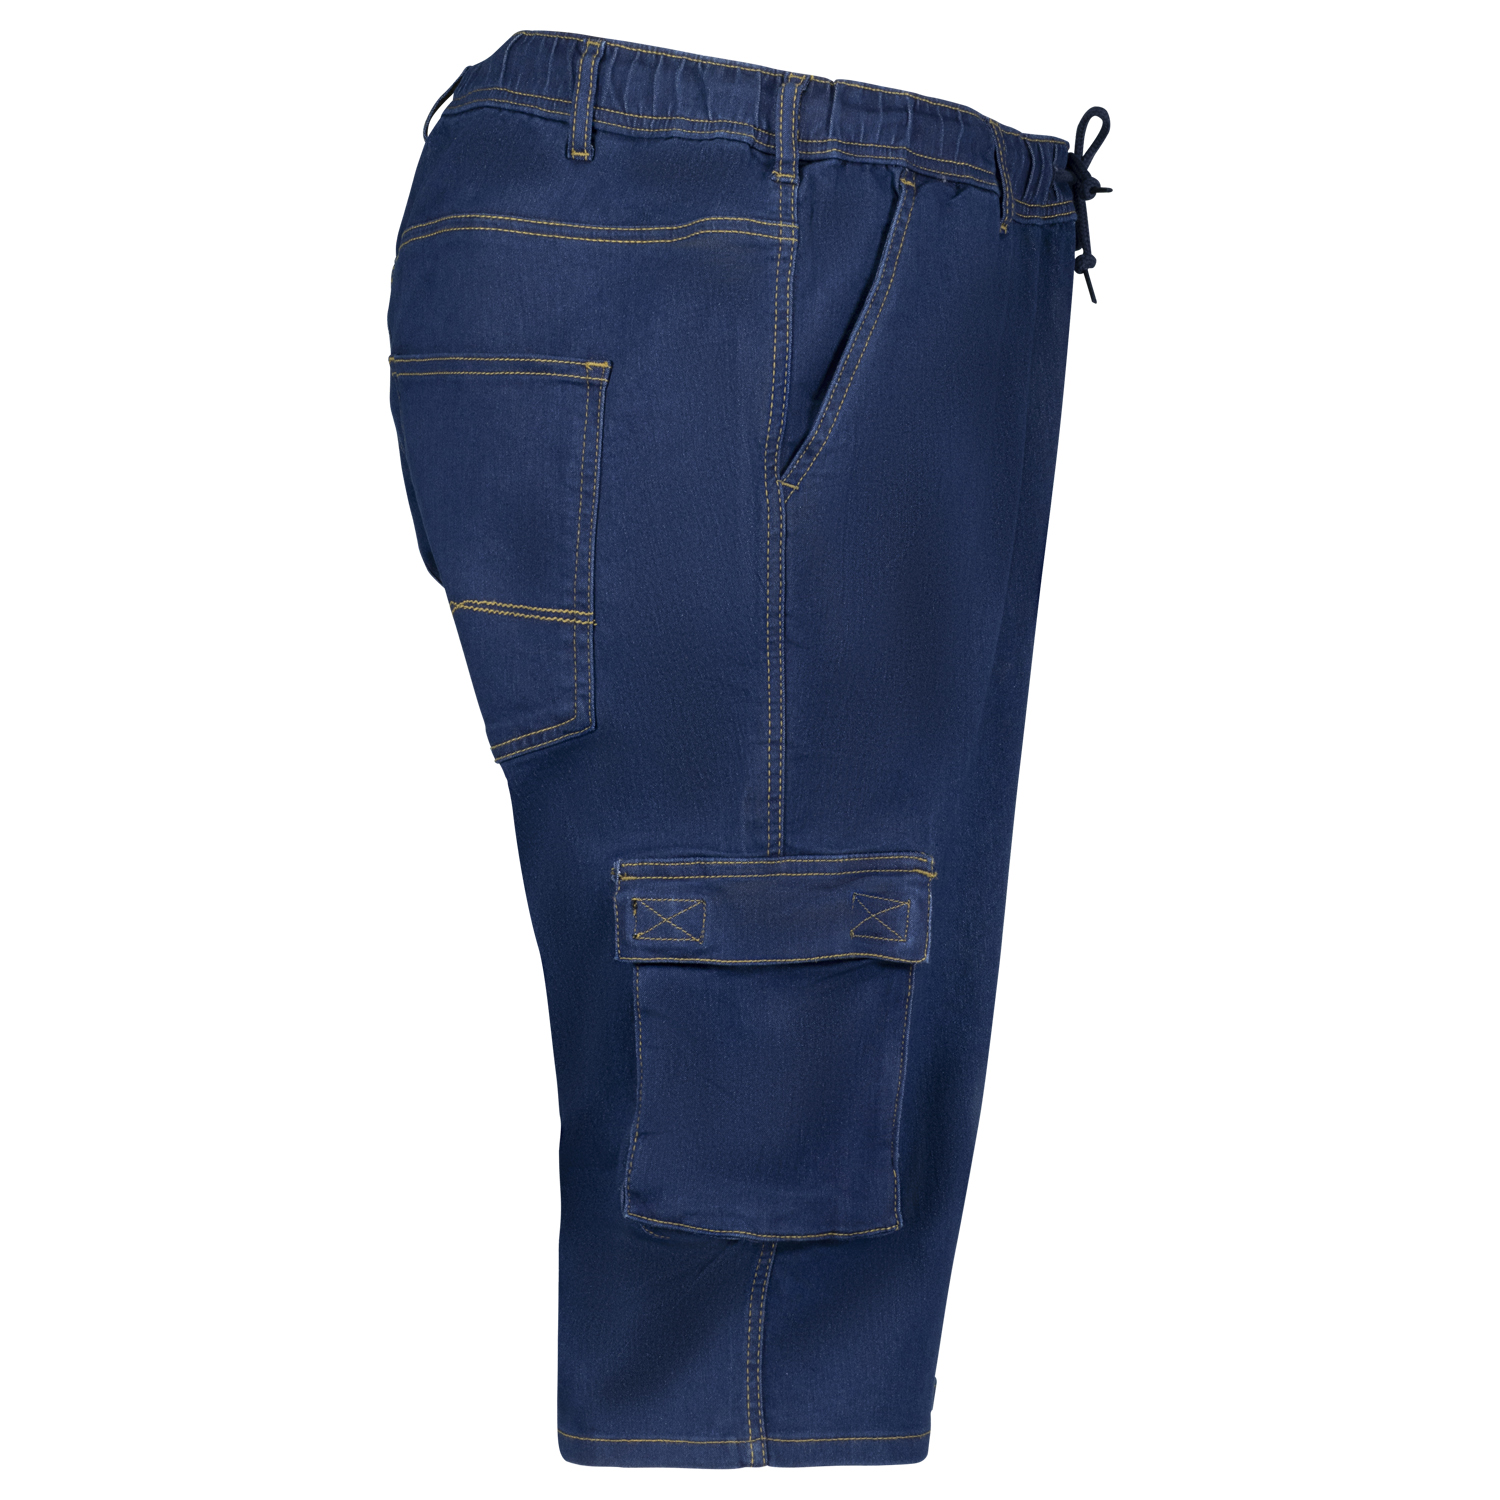 Jeans sweatpants capri in navy for men by Adamo series "Dallas" in oversizes up to 12XL